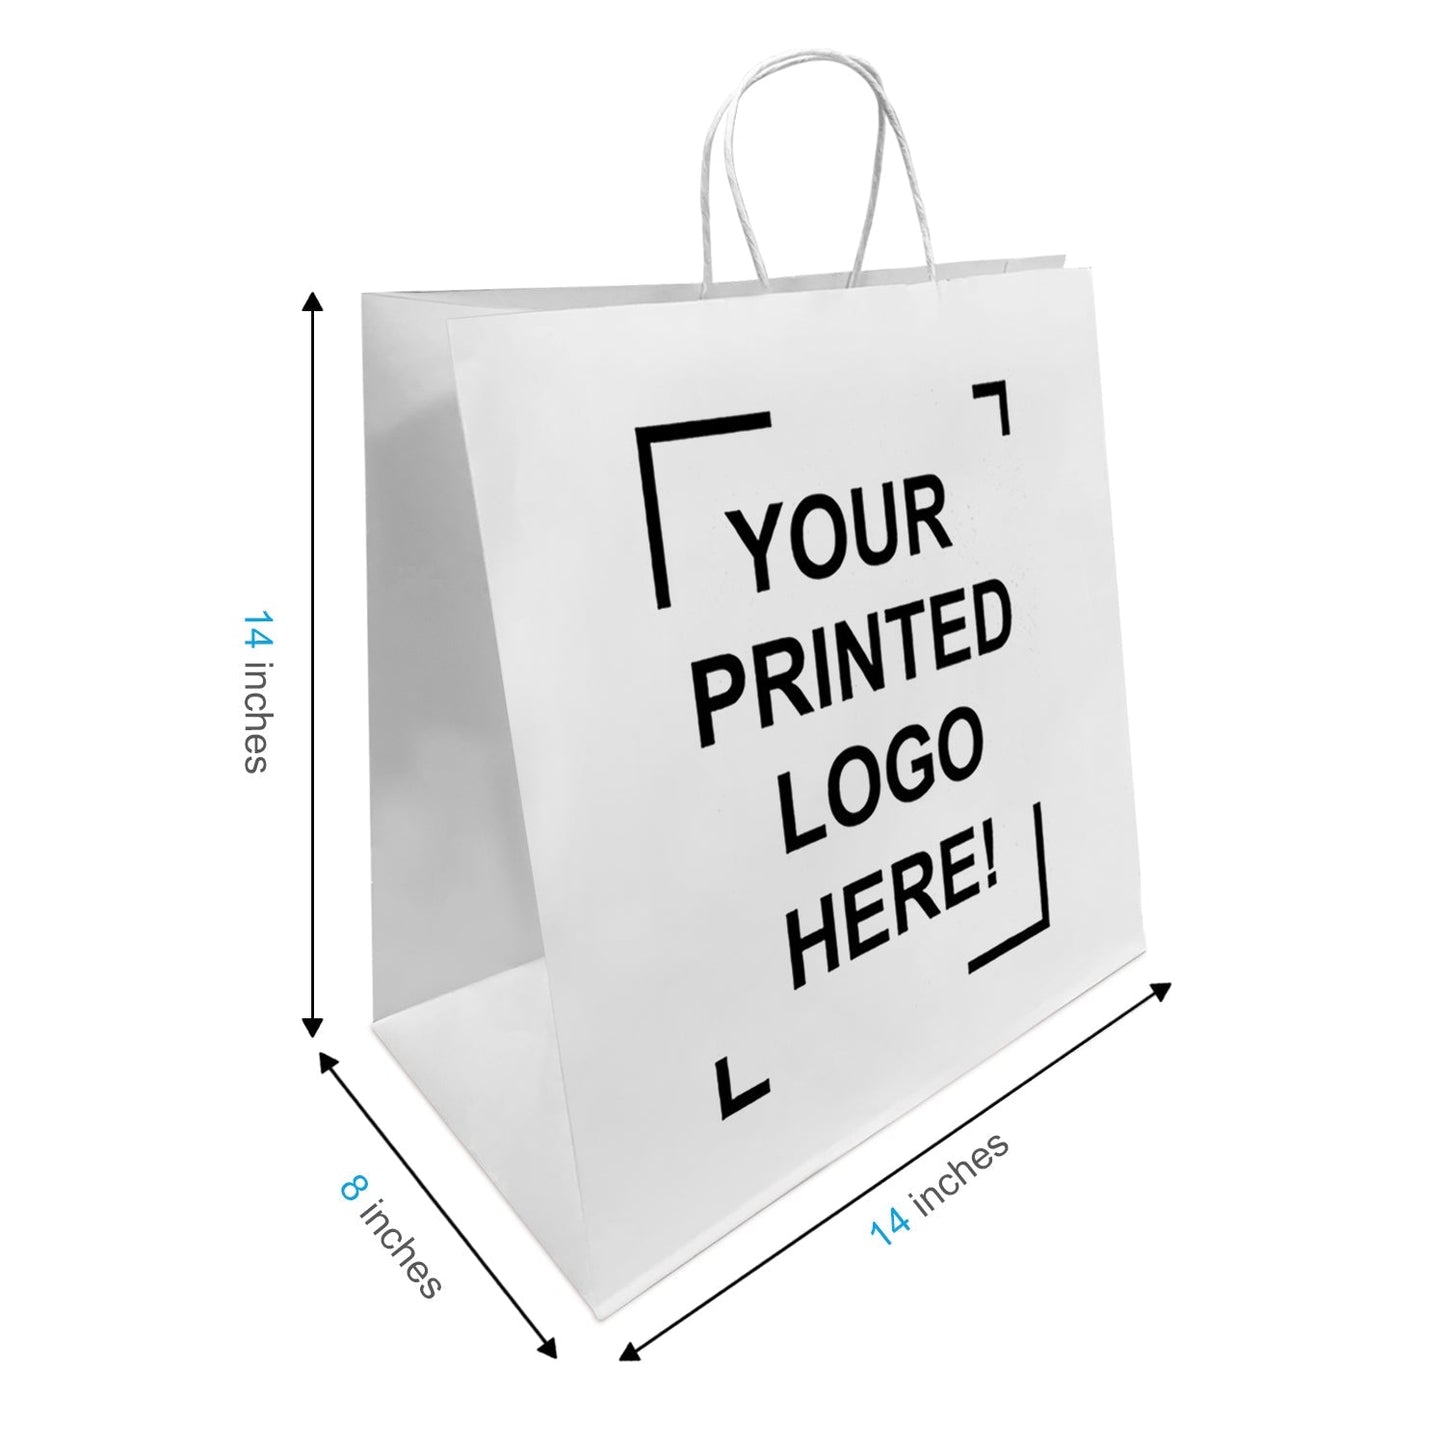 Custom Print Tiger 14x8x14 inches White Paper Bag; $3.70/pc, 50pcs/case, One Side Full Color Printed in North America